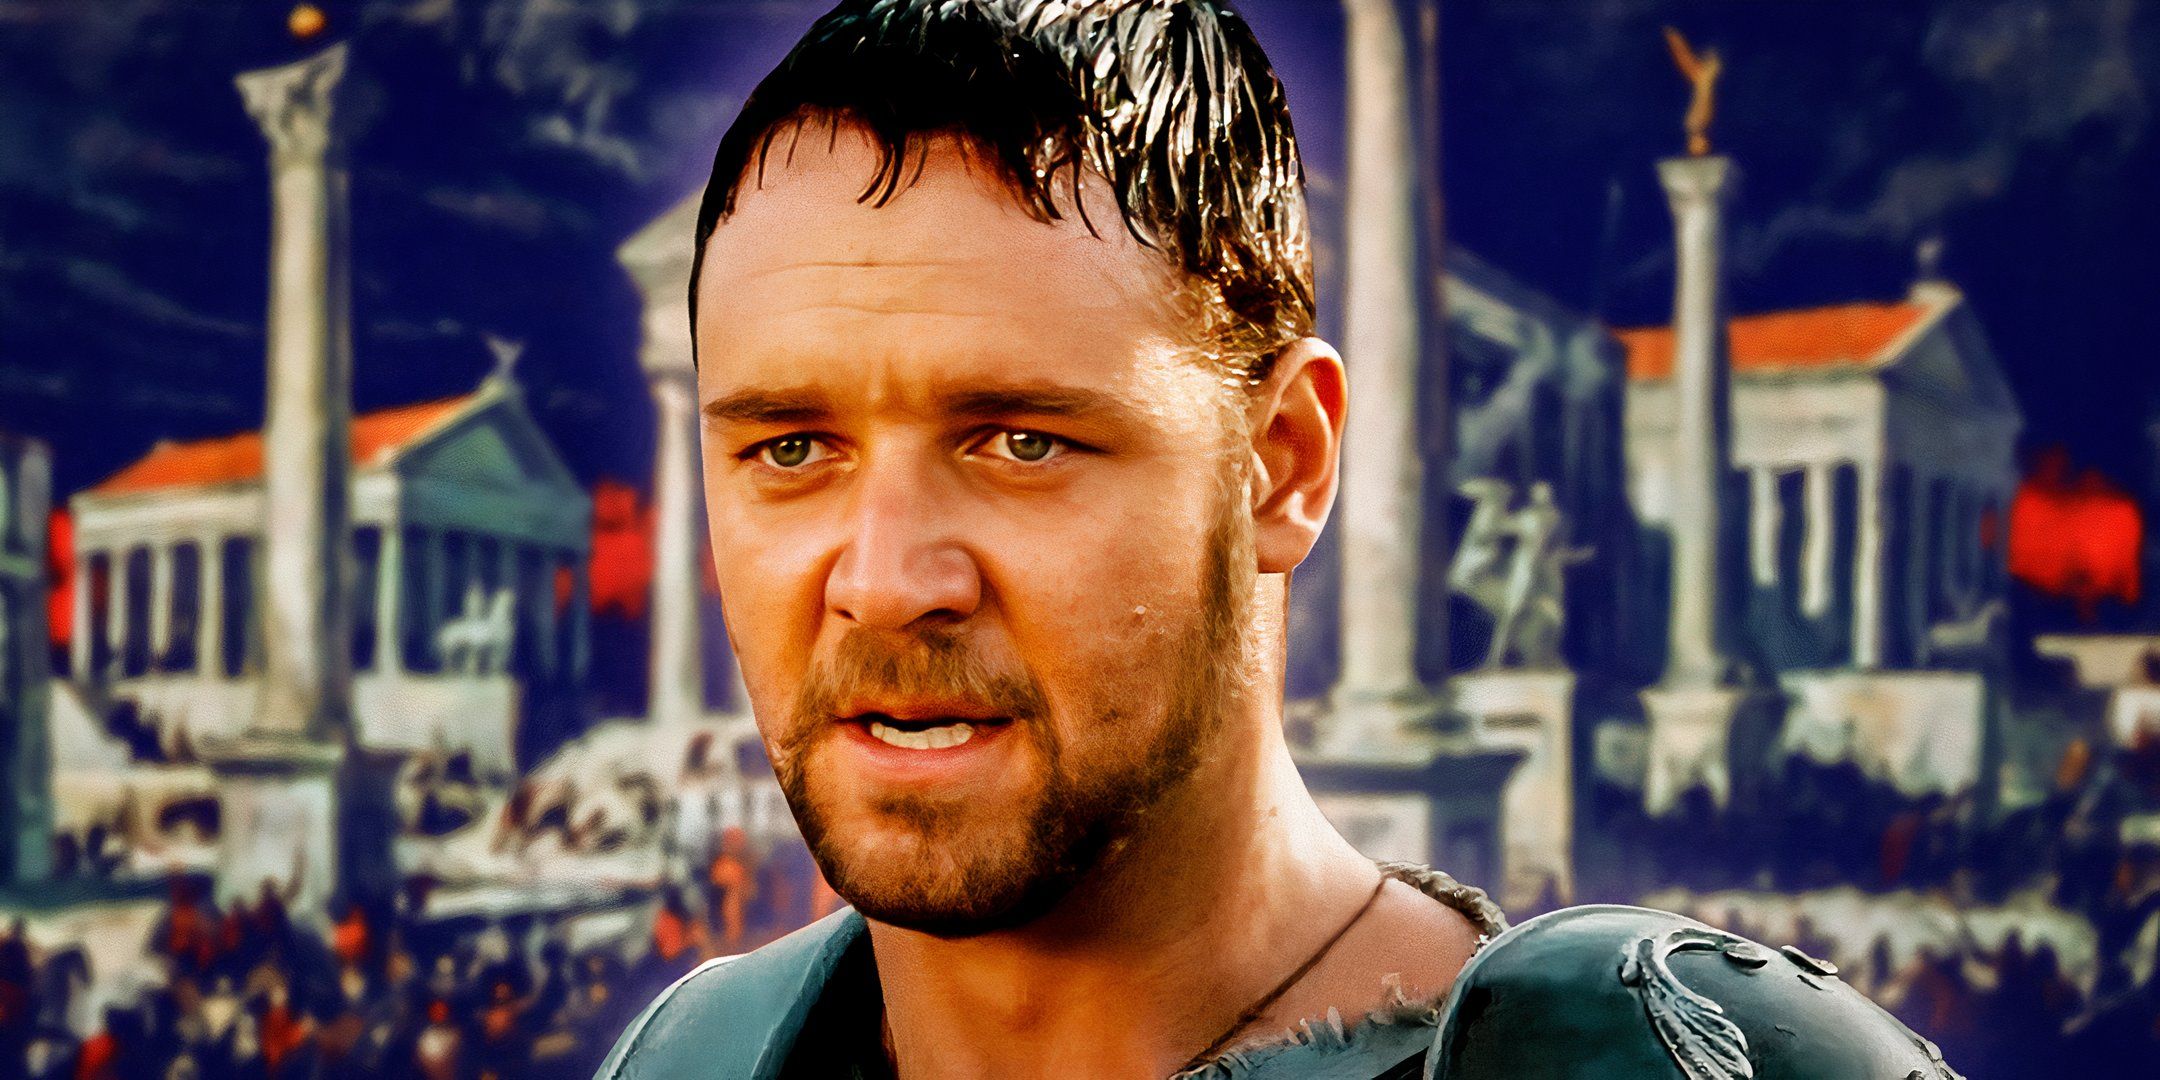 Russell Crowe stars as Maximus in Gladiator